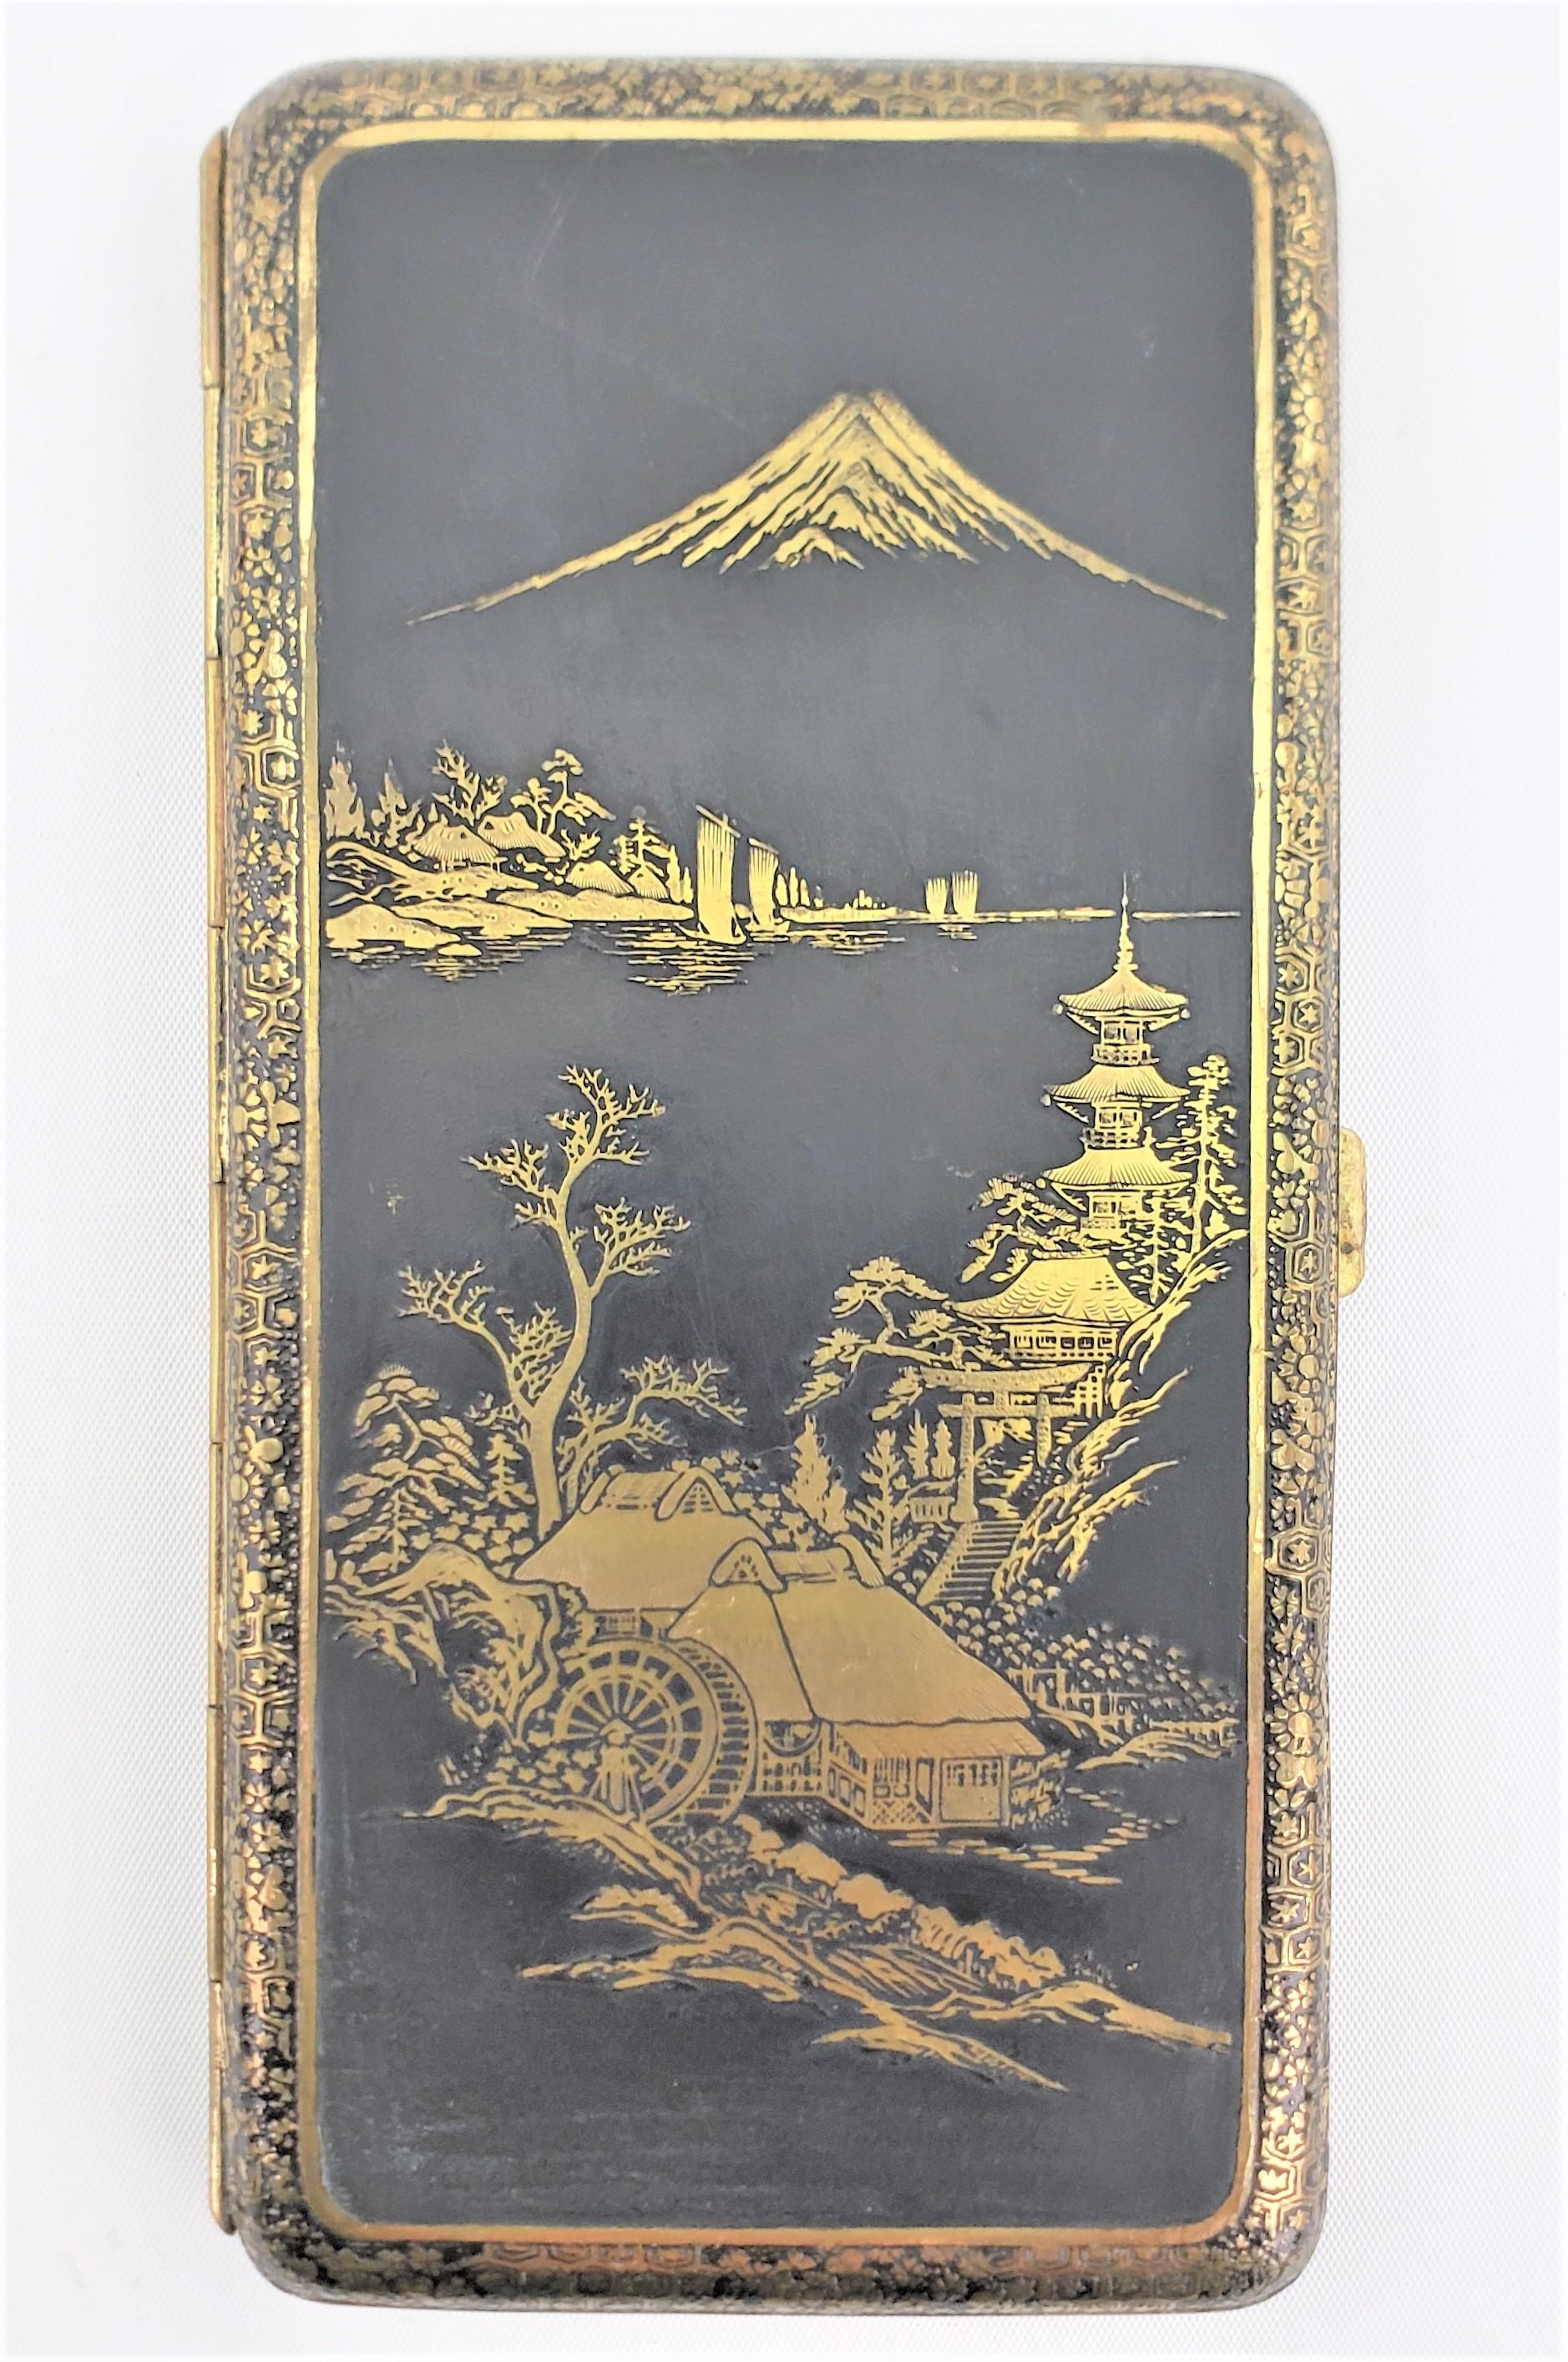 This large antique damascene styled tobacco case is unsigned, but presumed to have originated from Japan and dating to approximately 1920 and done in a Anglo-Japanese style. The case is made of metal which has been ornately engraved with a Japanese